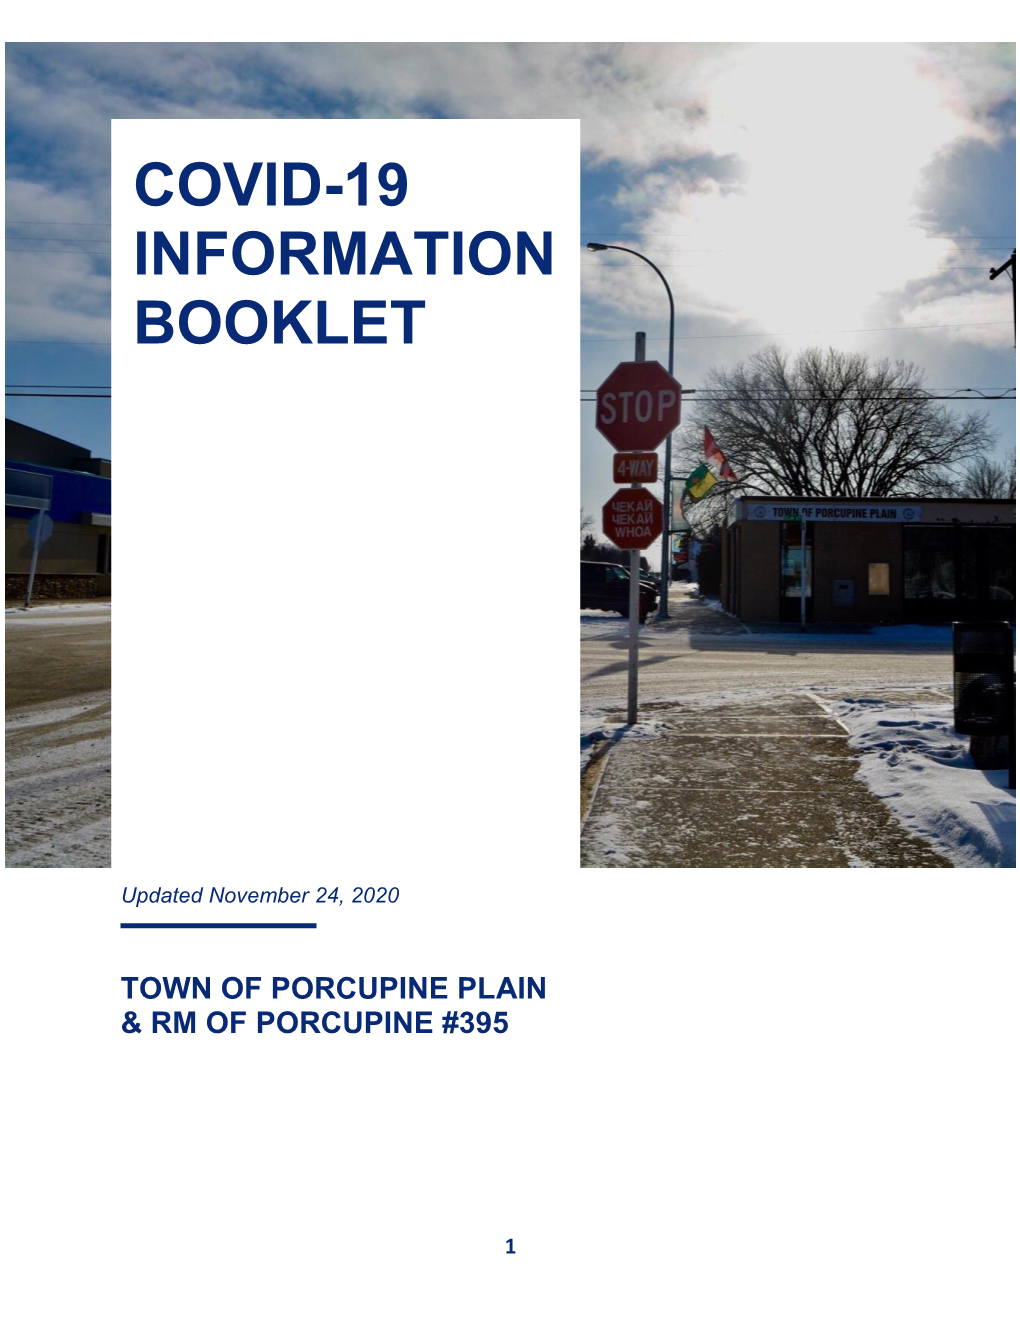 Covid-19 Information Booklet